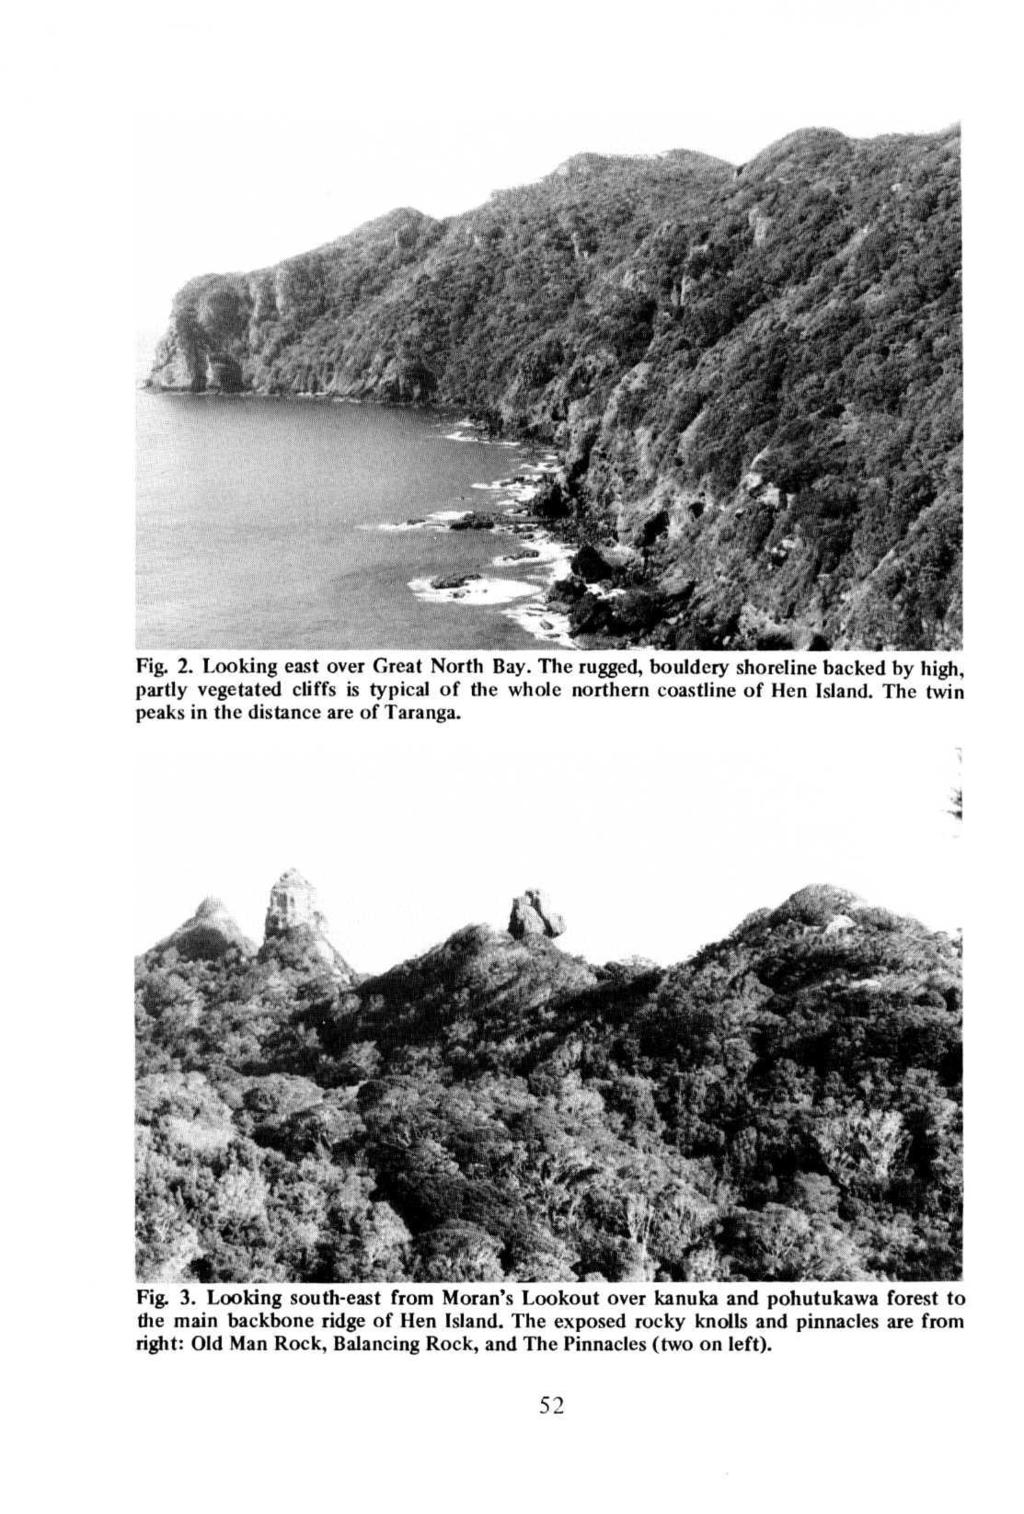 Fig. 2. Looking east over Great North Bay. The rugged, bouldery shoreline backed by high, partly vegetated cliffs is typical of the whole northern coastline of Hen Island.